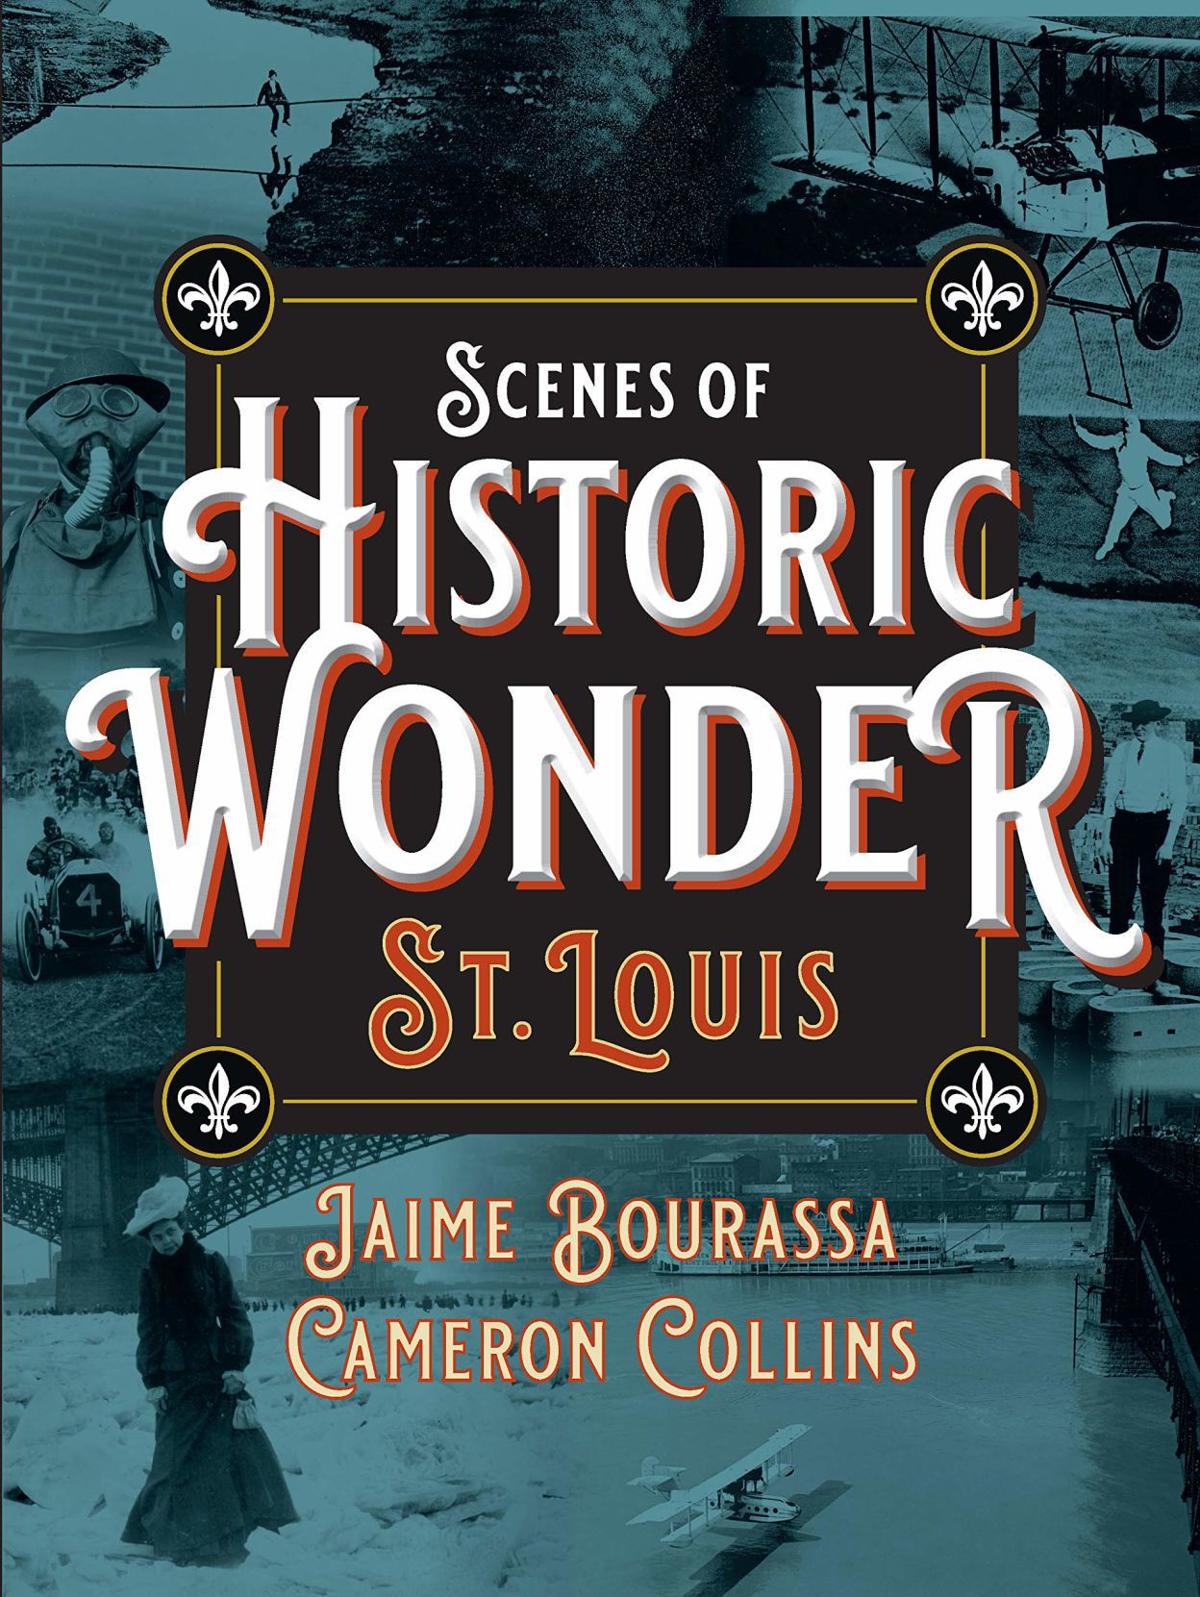 7 new coffee table books show St. Louis marvels and